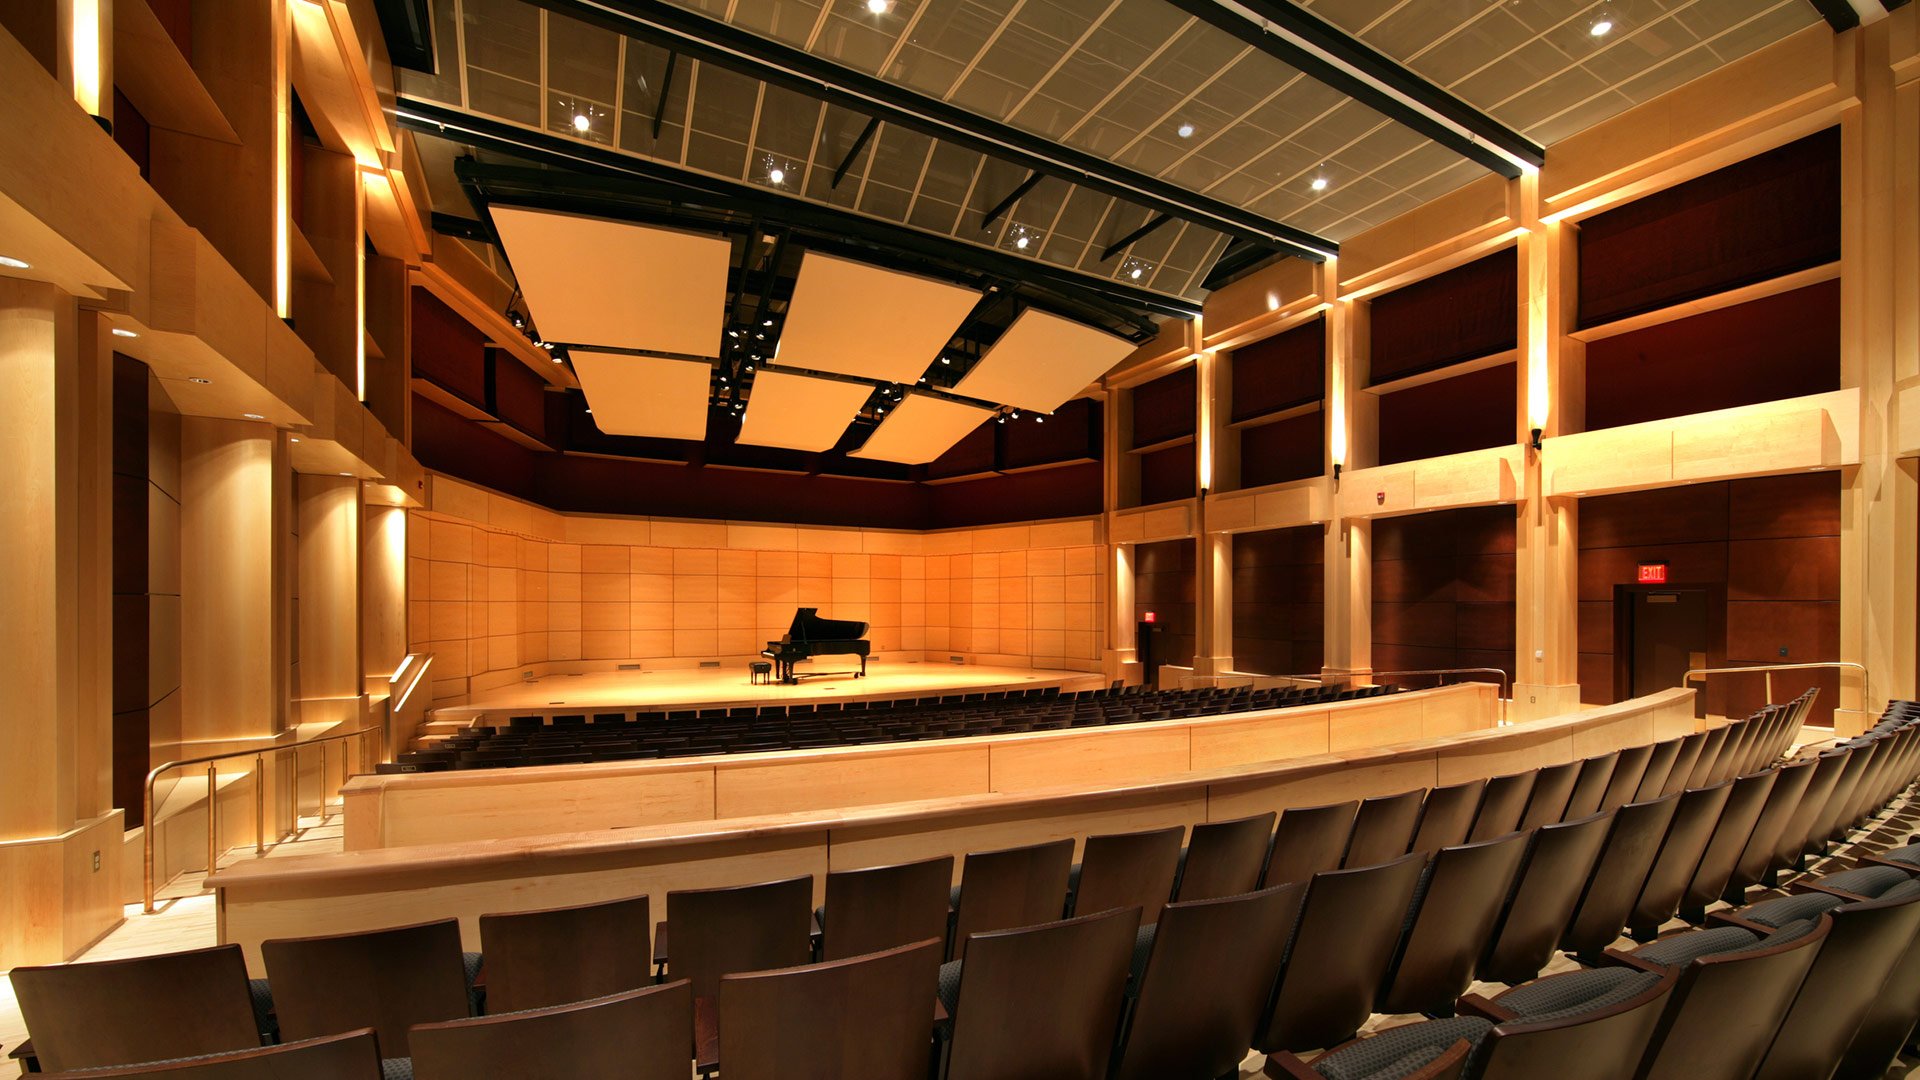 Radford University, Douglas and Beatrice Covington Center for Visual and Performing Arts